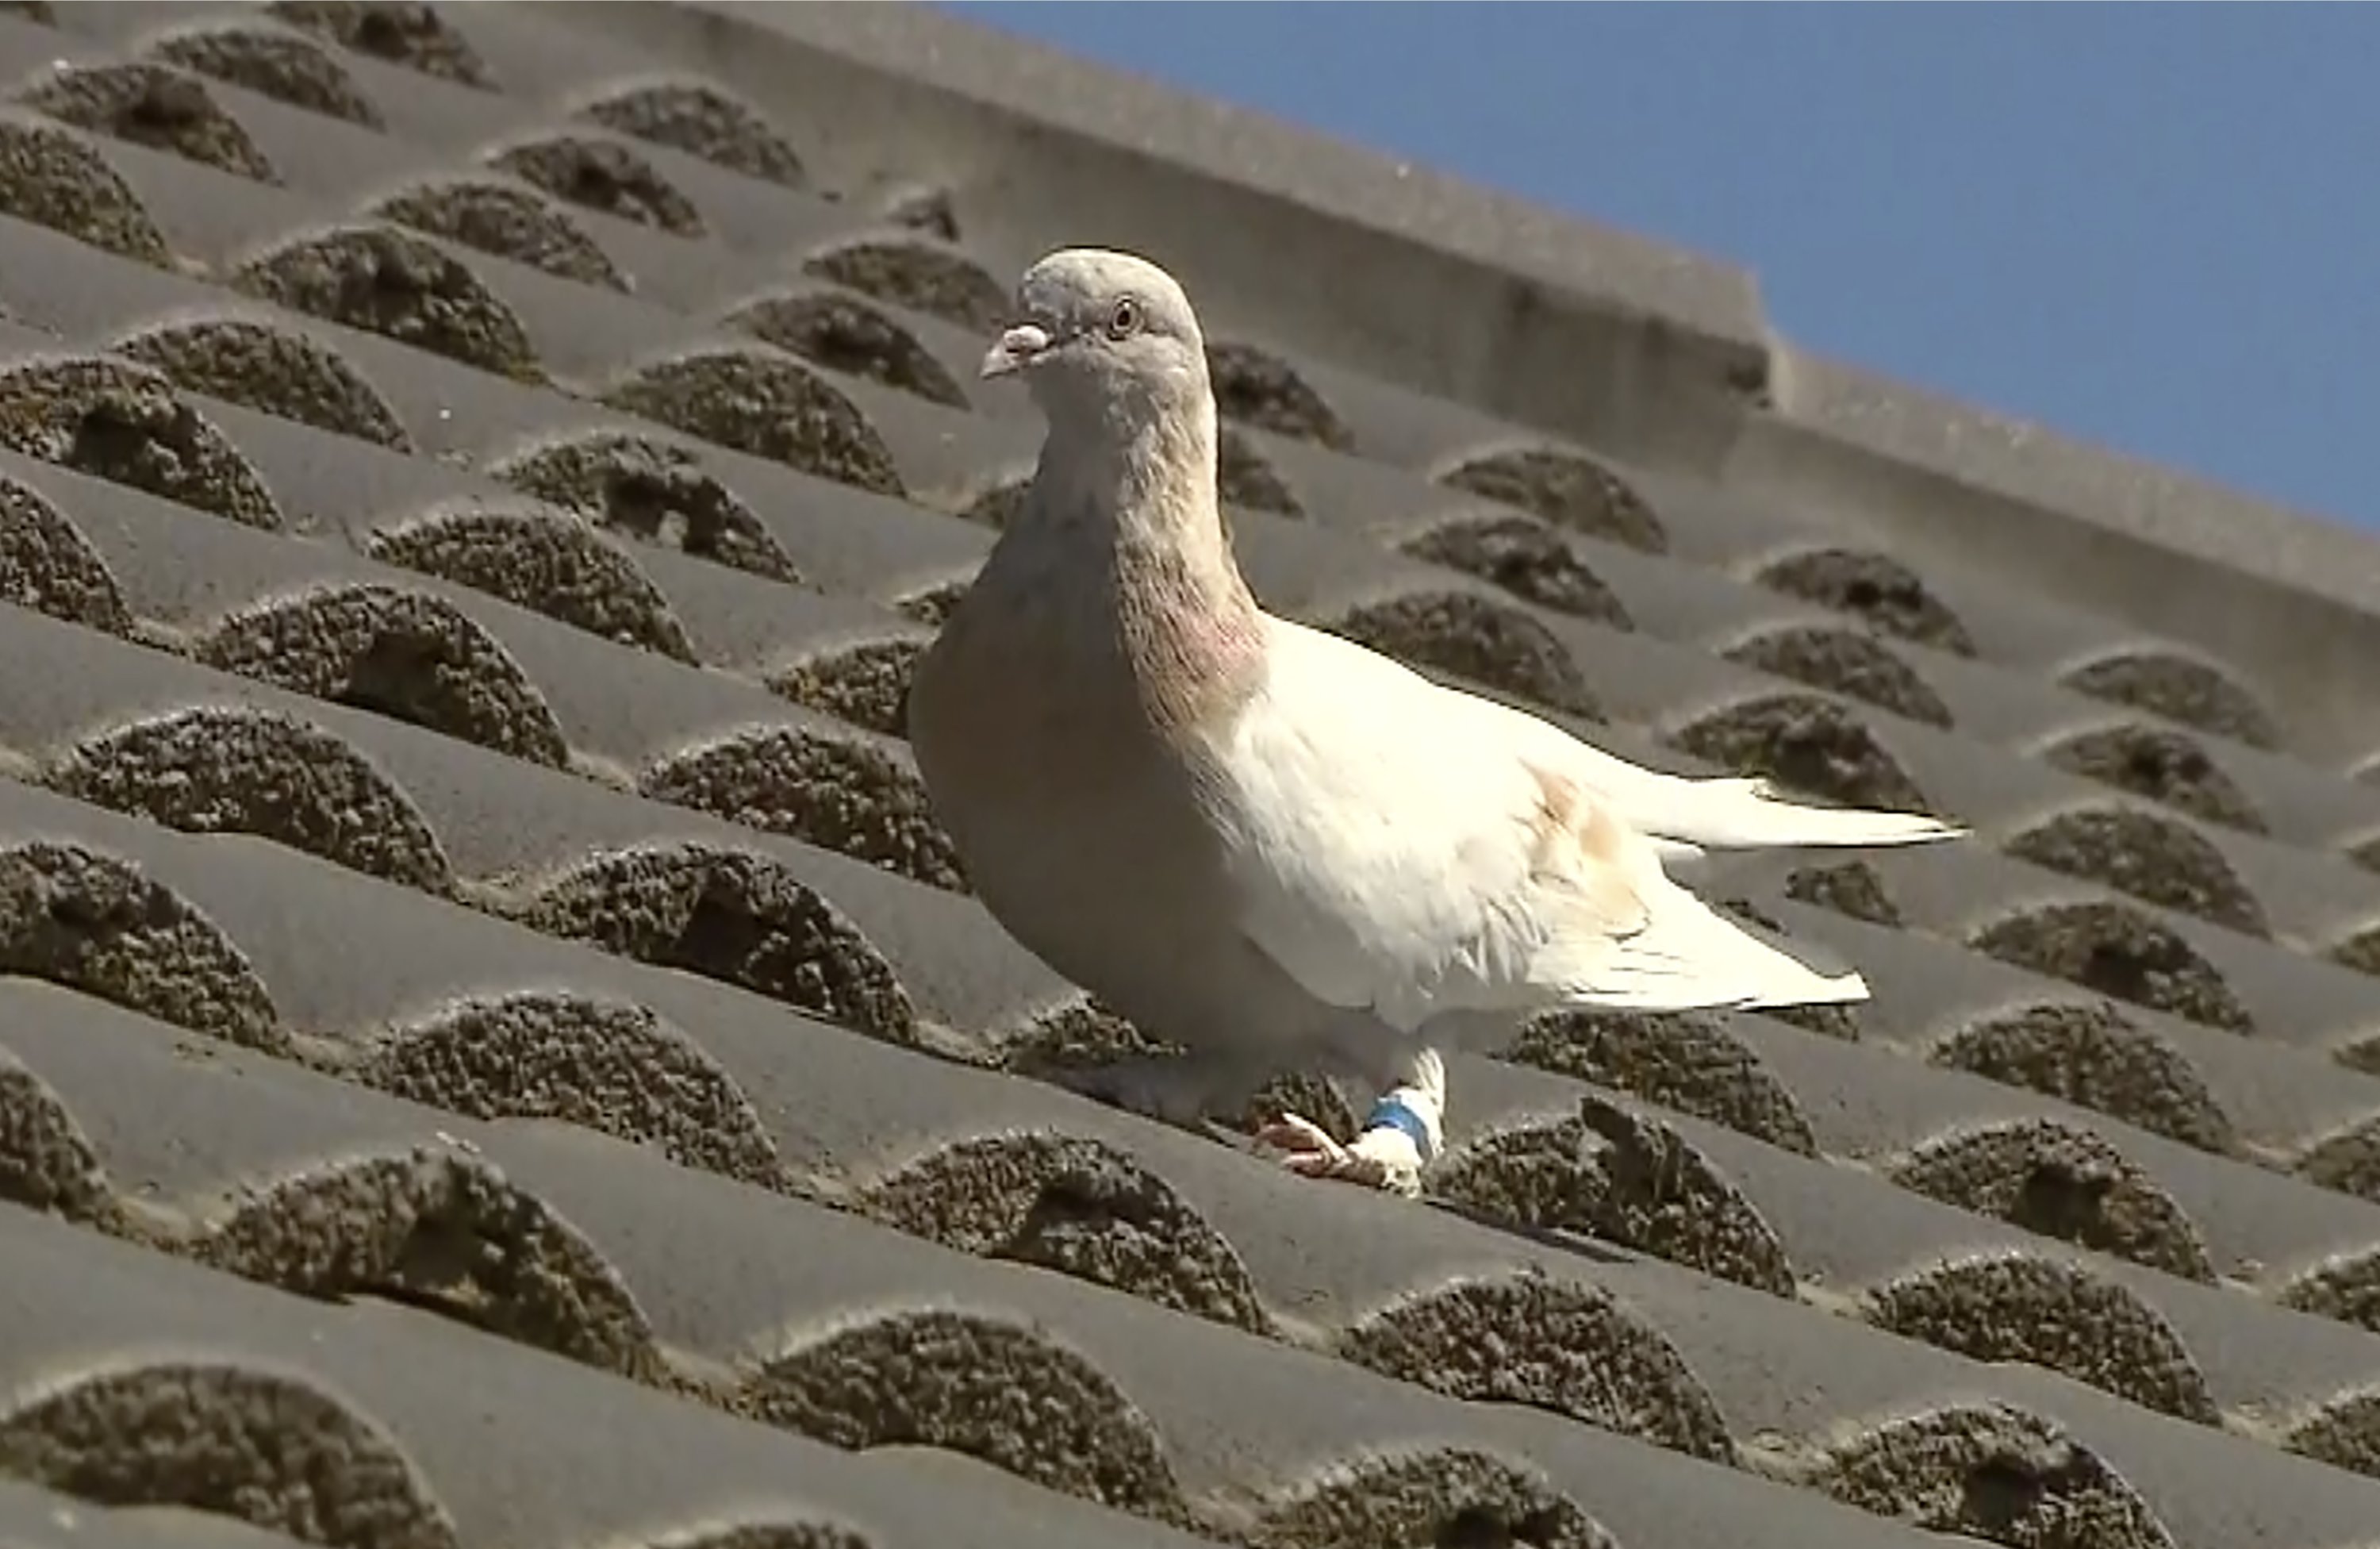 Seen wandering on the rooftop, experts suspect the pigeon named Joe, after the U.S. president-elect, hitched a ride on a cargo ship to cross the Pacific, Jan. 13, 2021. (Channel 9 Photo via AP)